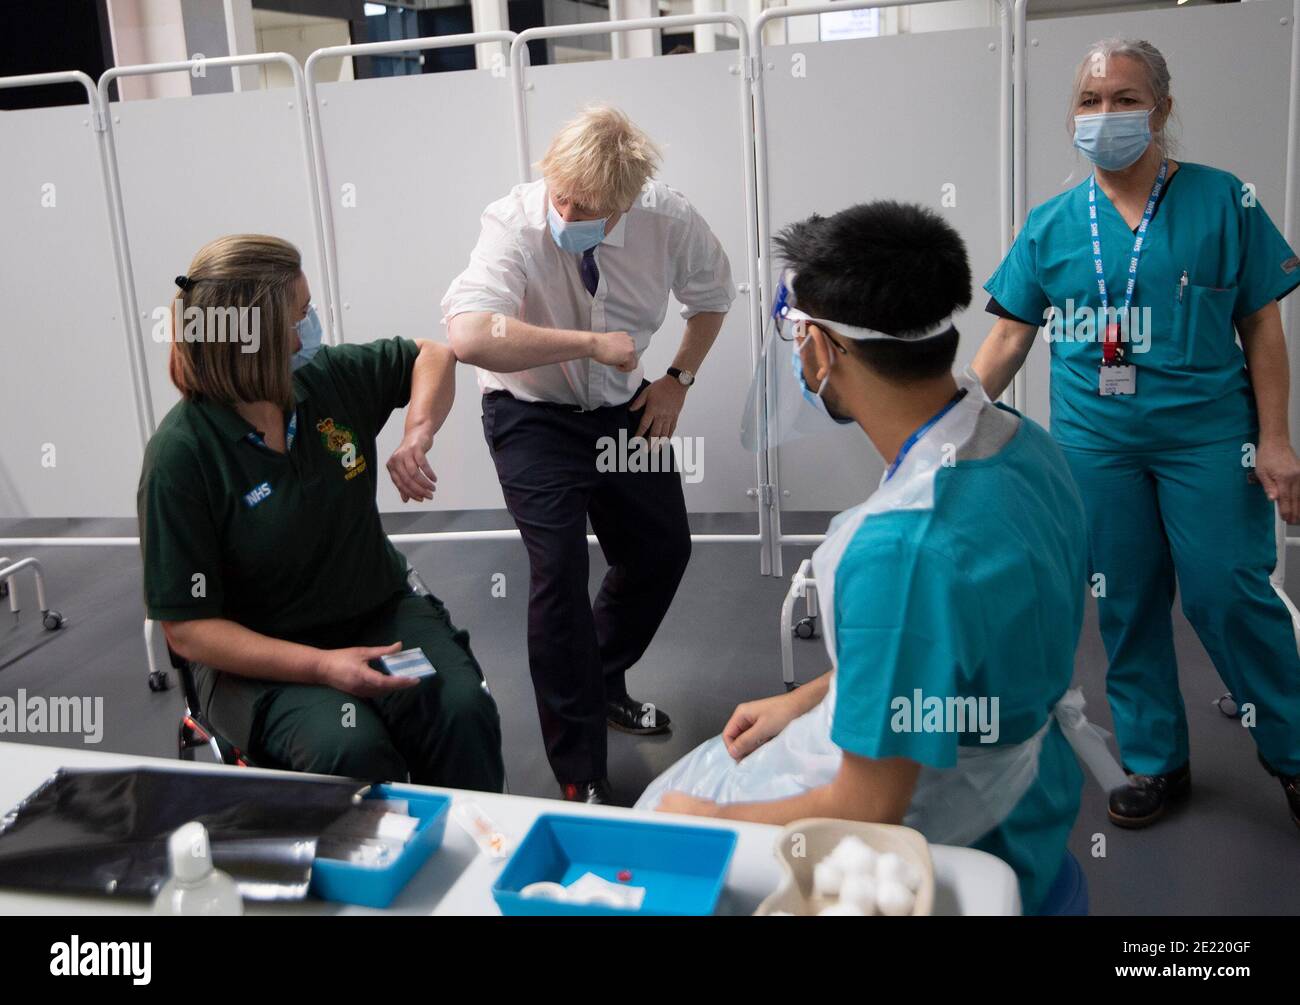 Prime Minister Boris Johnson at Ashton Gate Stadium in Bristol greets first responder Caroline Cook before she receives an injection of a Covid-19 vaccine during a visit to one of the seven mass vaccination centres now opened to the general public as the government continues to ramp up the vaccination programme against Covid-19. Stock Photo